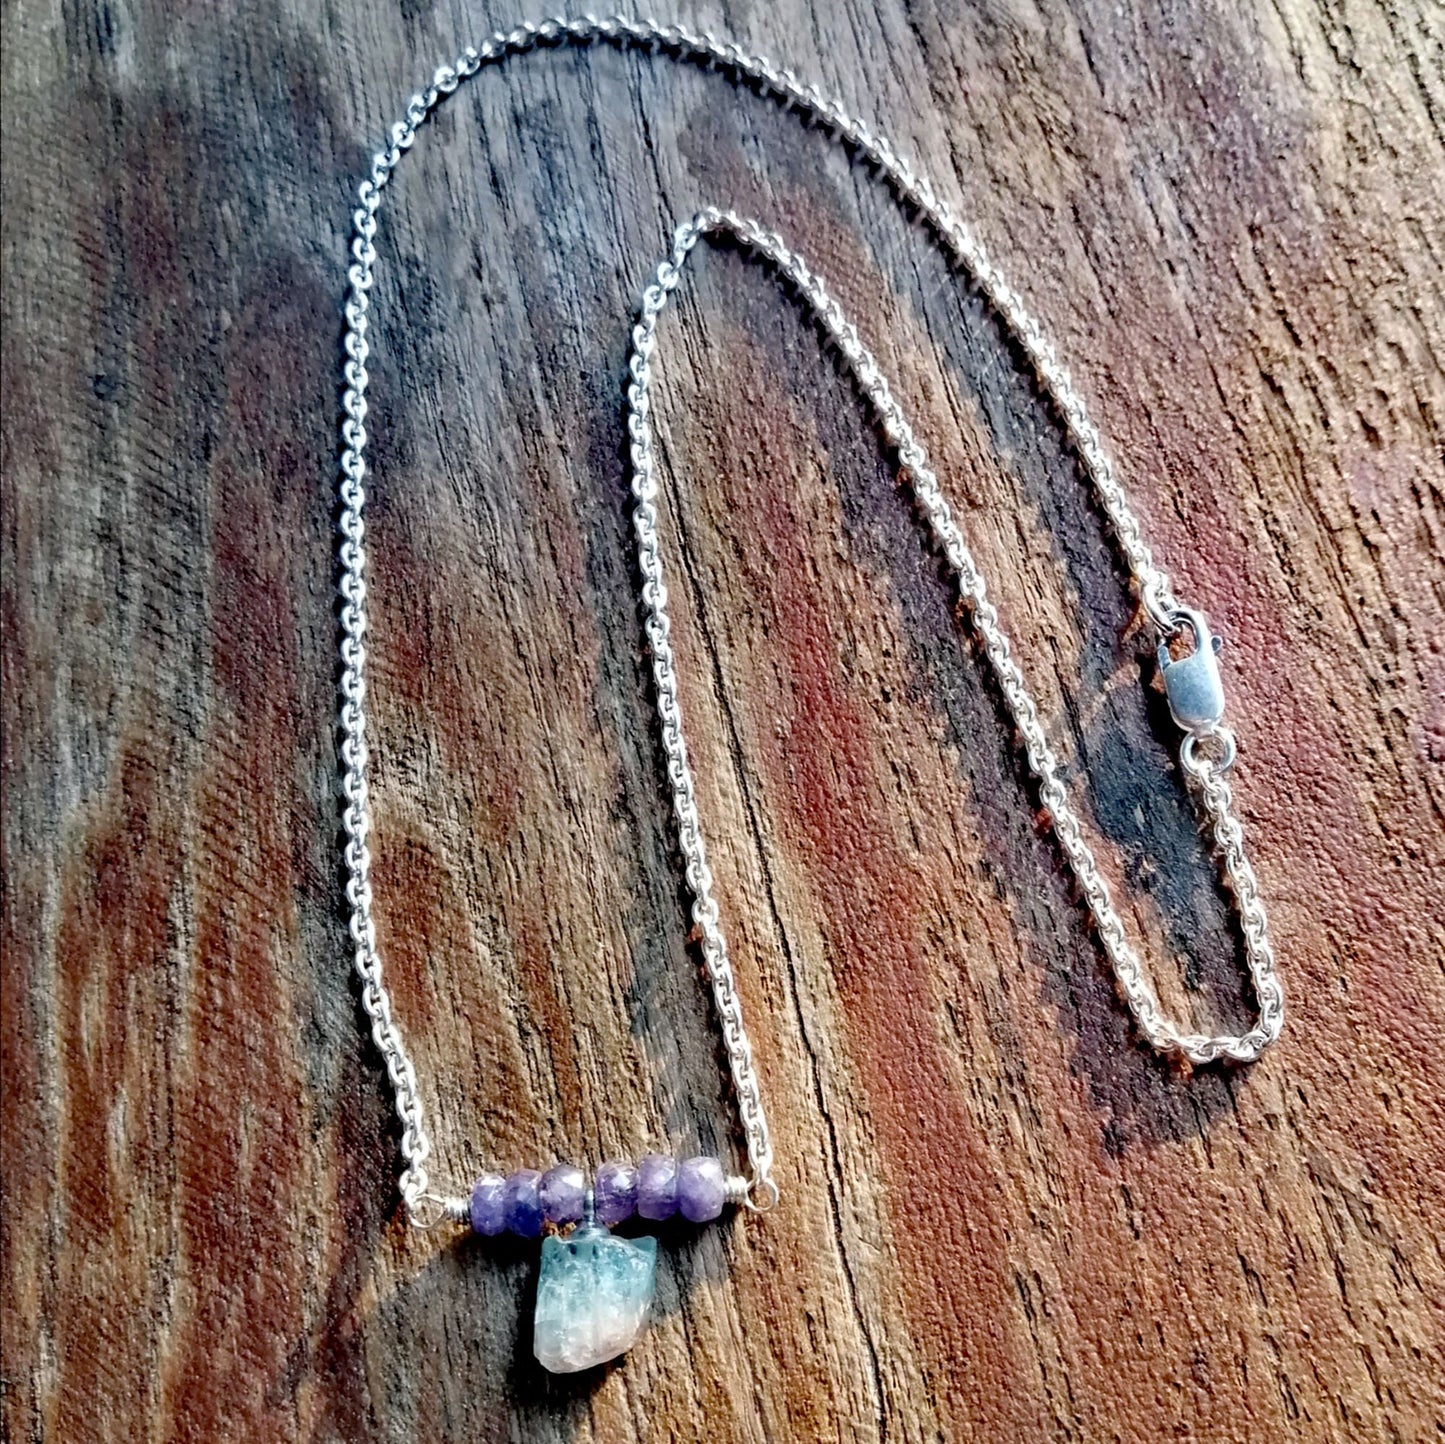 Apatite and Tanzanite Necklace - Sixth Chakras - Know yourself on a deeper level so your creativity can flow!